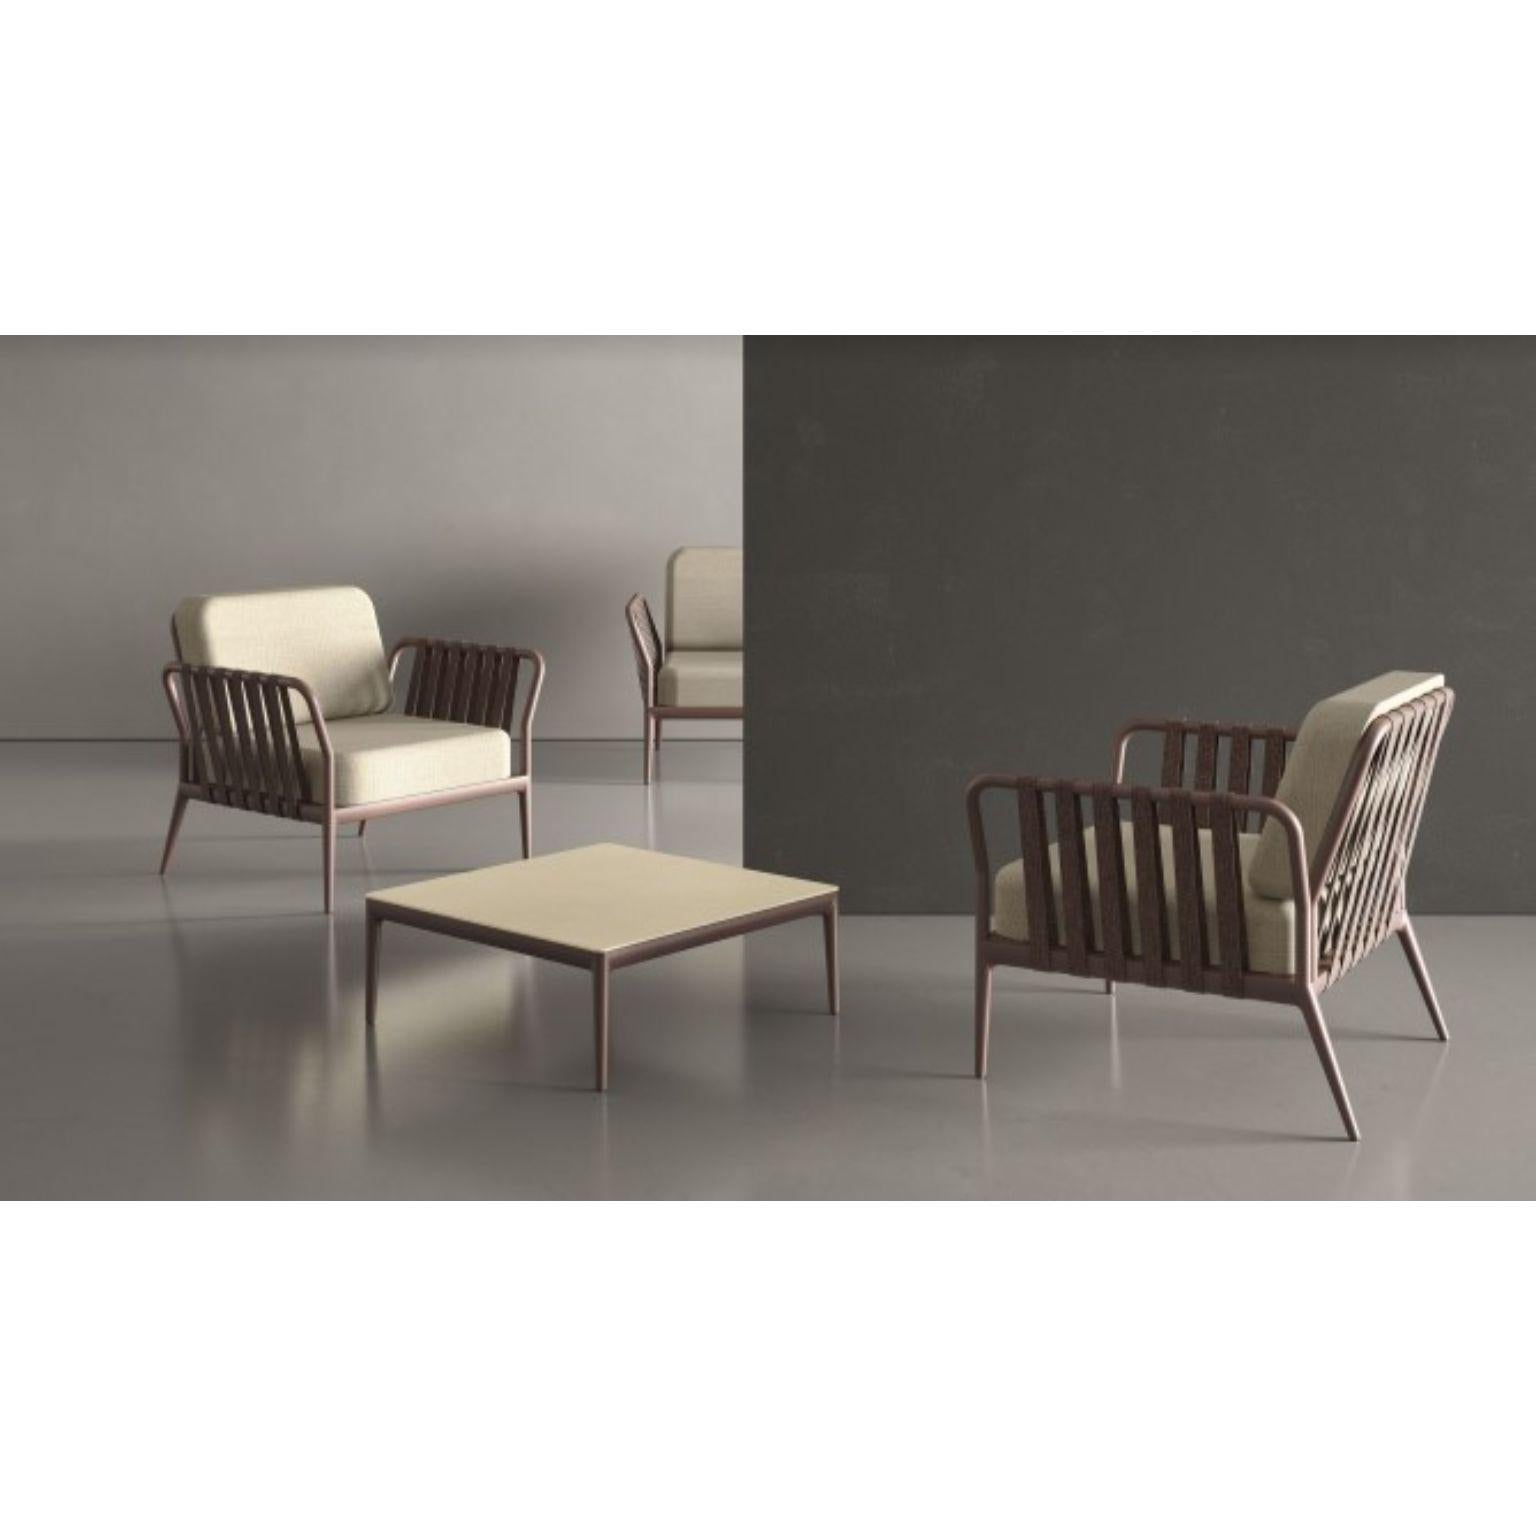 Post-Modern Ribbons Cream Armchair by Mowee For Sale